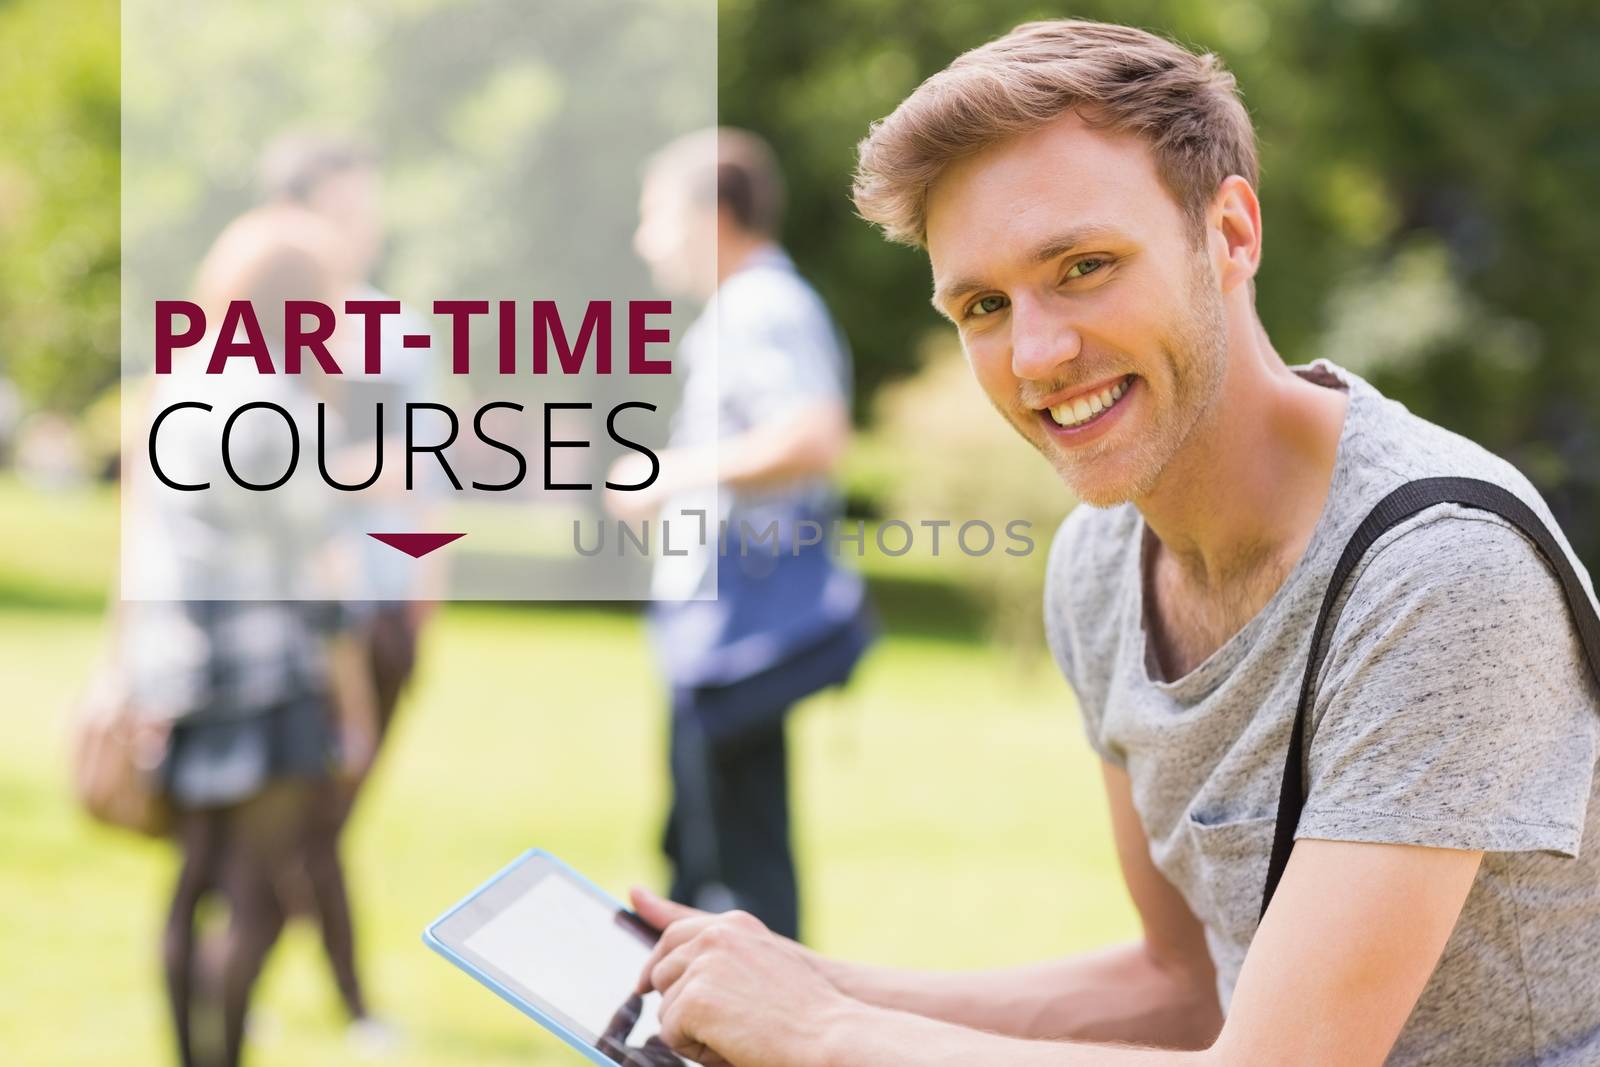 Education and part-time courses text and man using a tablet by Wavebreakmedia